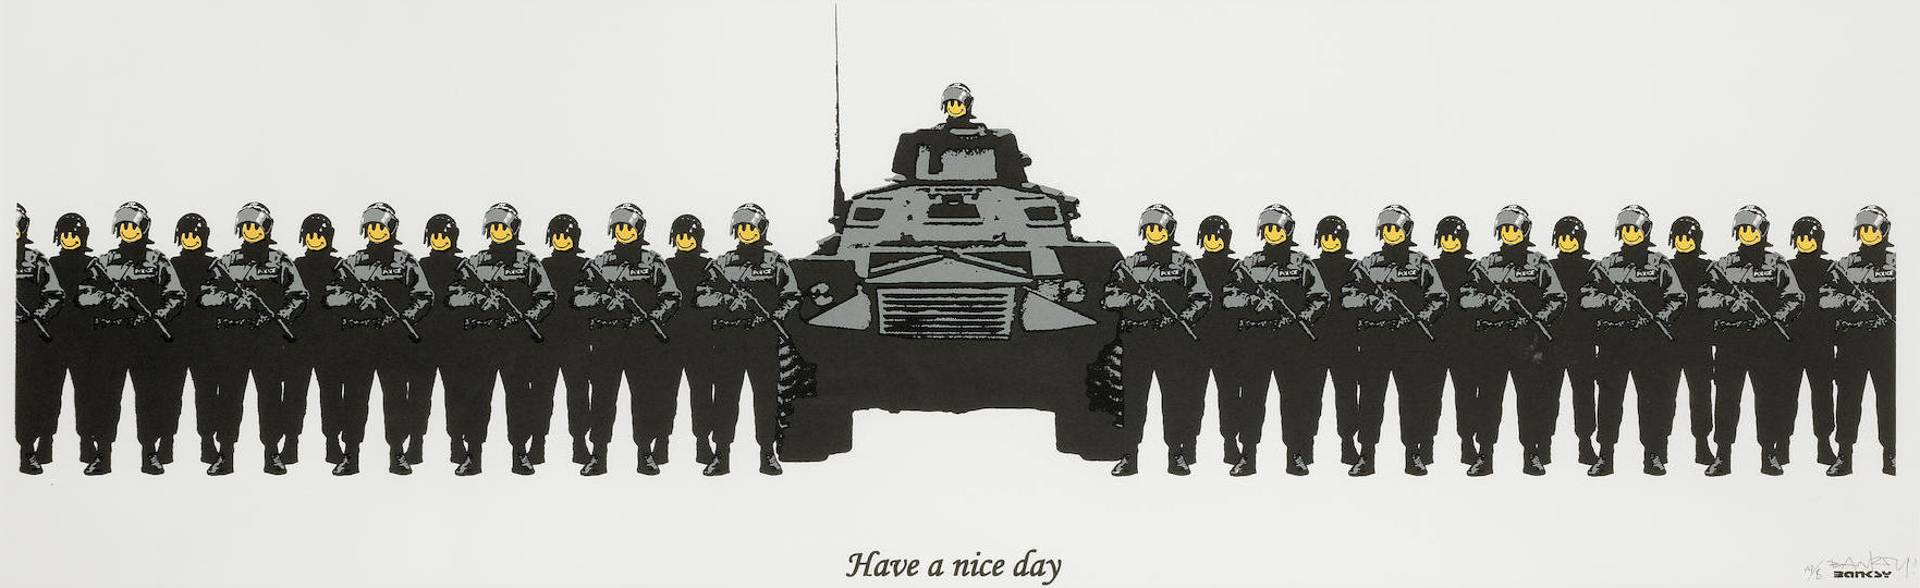 Have a Nice Day by Banksy